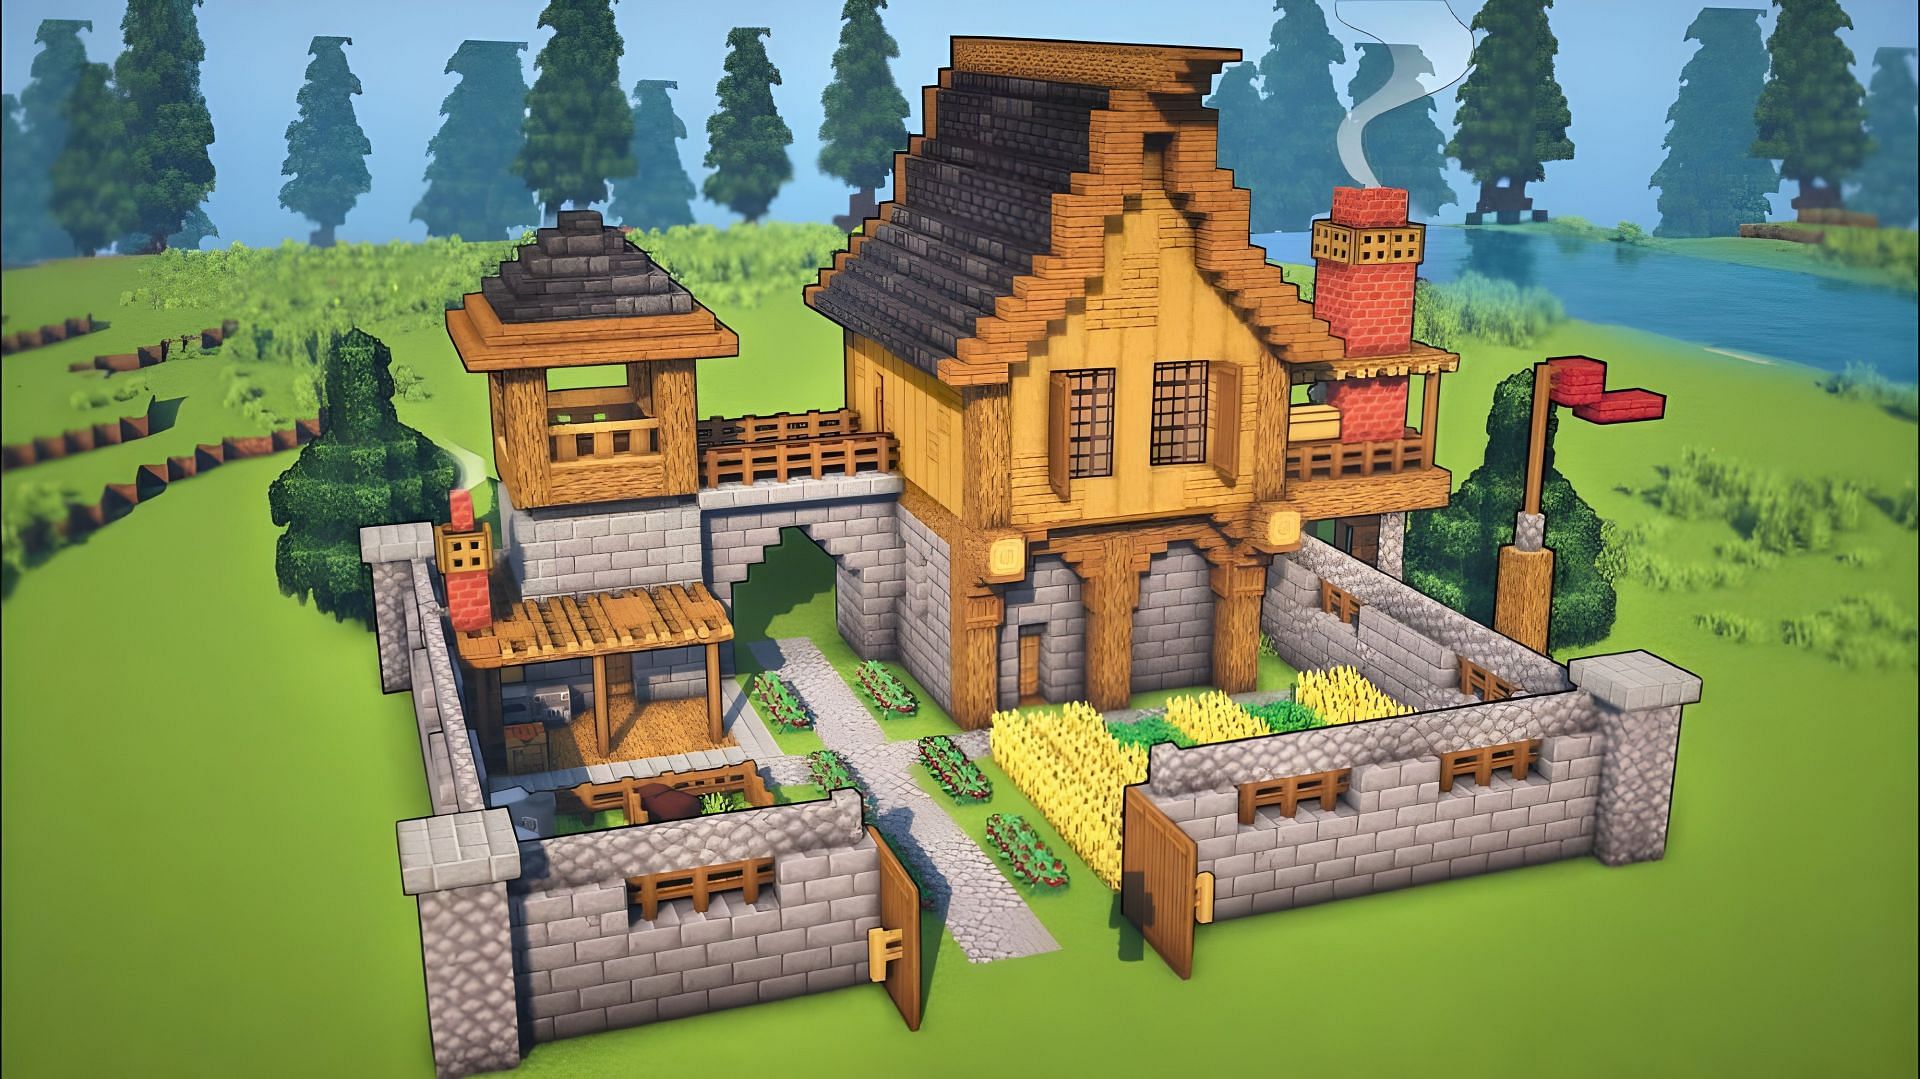 The Medieval Survival Base (Image via Youtube/Capy Builds)